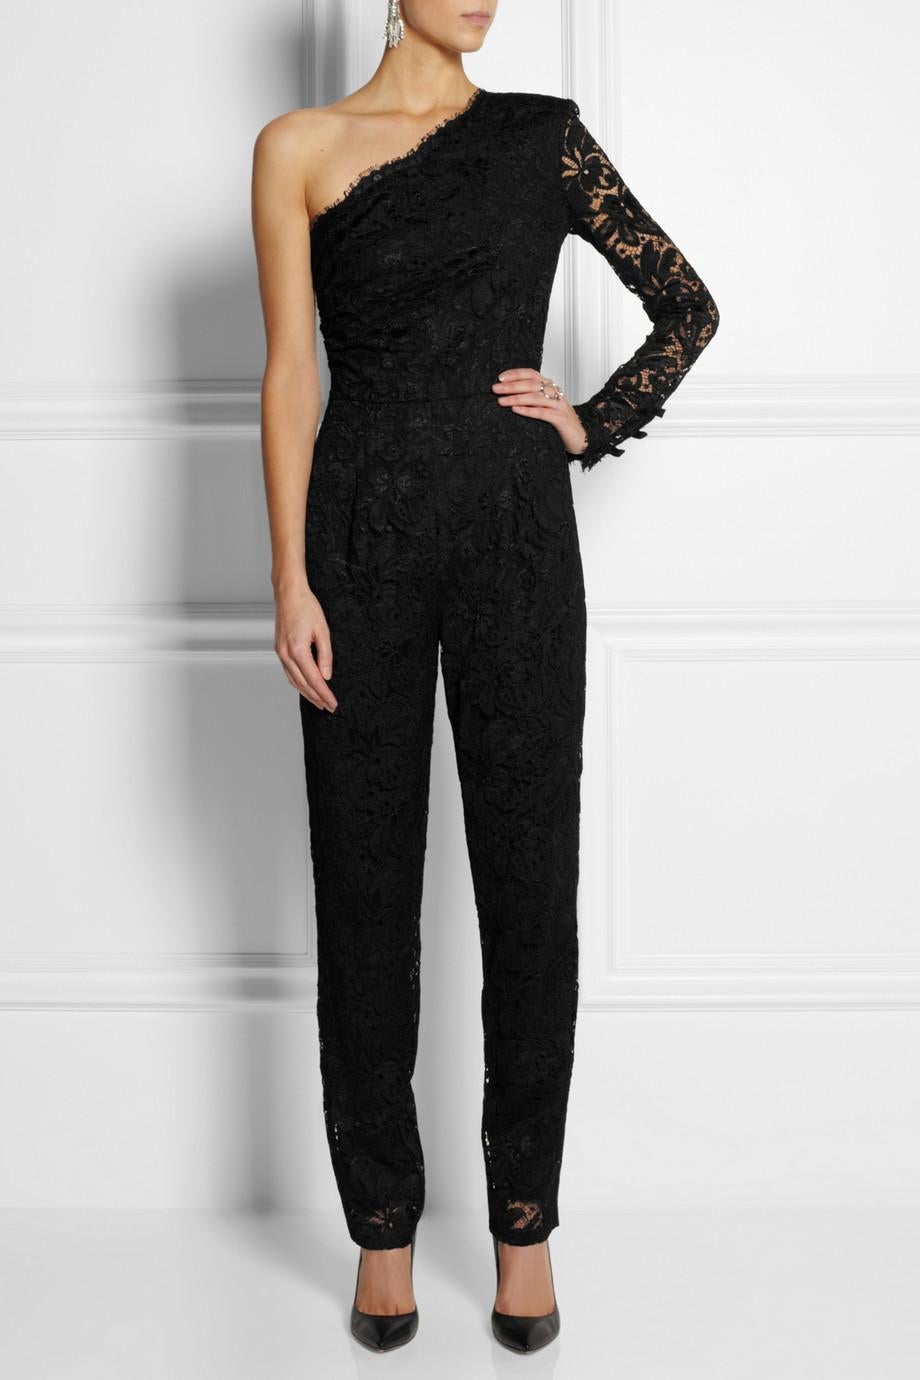 Amazing black jumpsuit designed by  Peter Dundas for Emilio Pucci

Designer Peter Dundas referenced the glamor of the late '60s and early '70s for the Emilio Pucci his collection. 

Cut with a single shoulder, this black lace jumpsuit is tailored